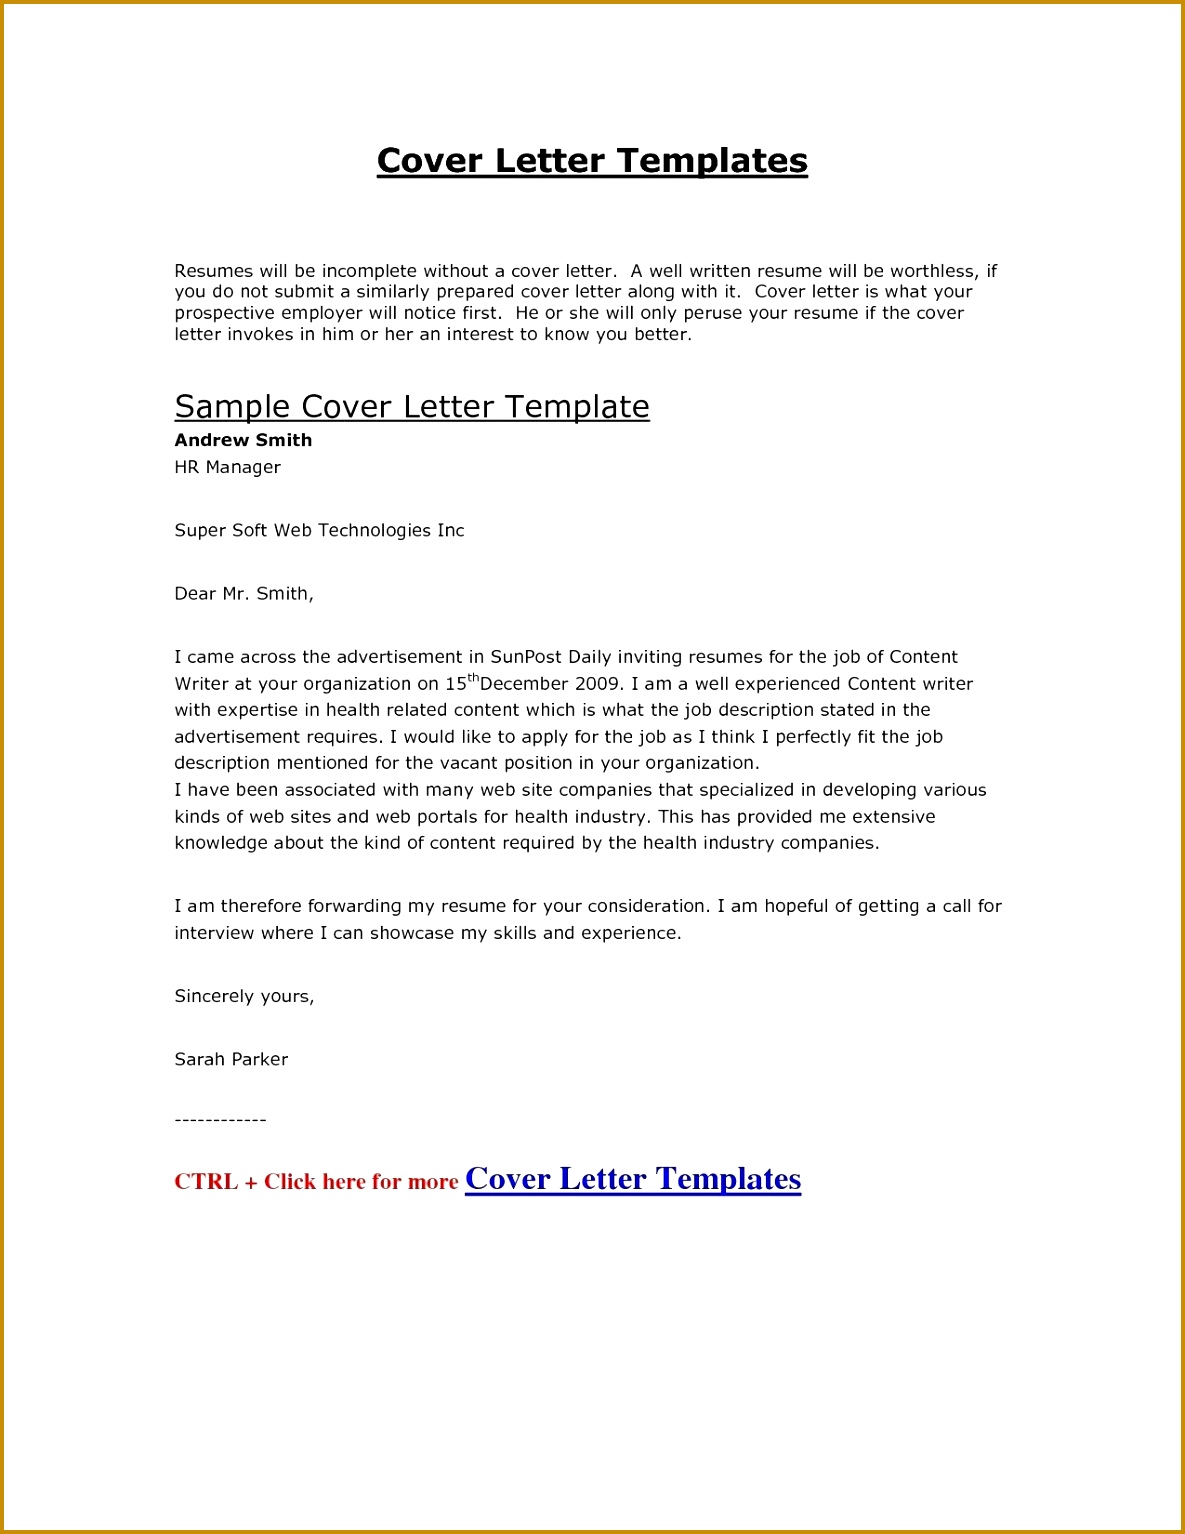 Job Application Letter Format Template Copy Cover Letter Template Hr Fresh A Good Cover Letter Sample Best Od Best Good Covering Letter Template Gallery 15341185